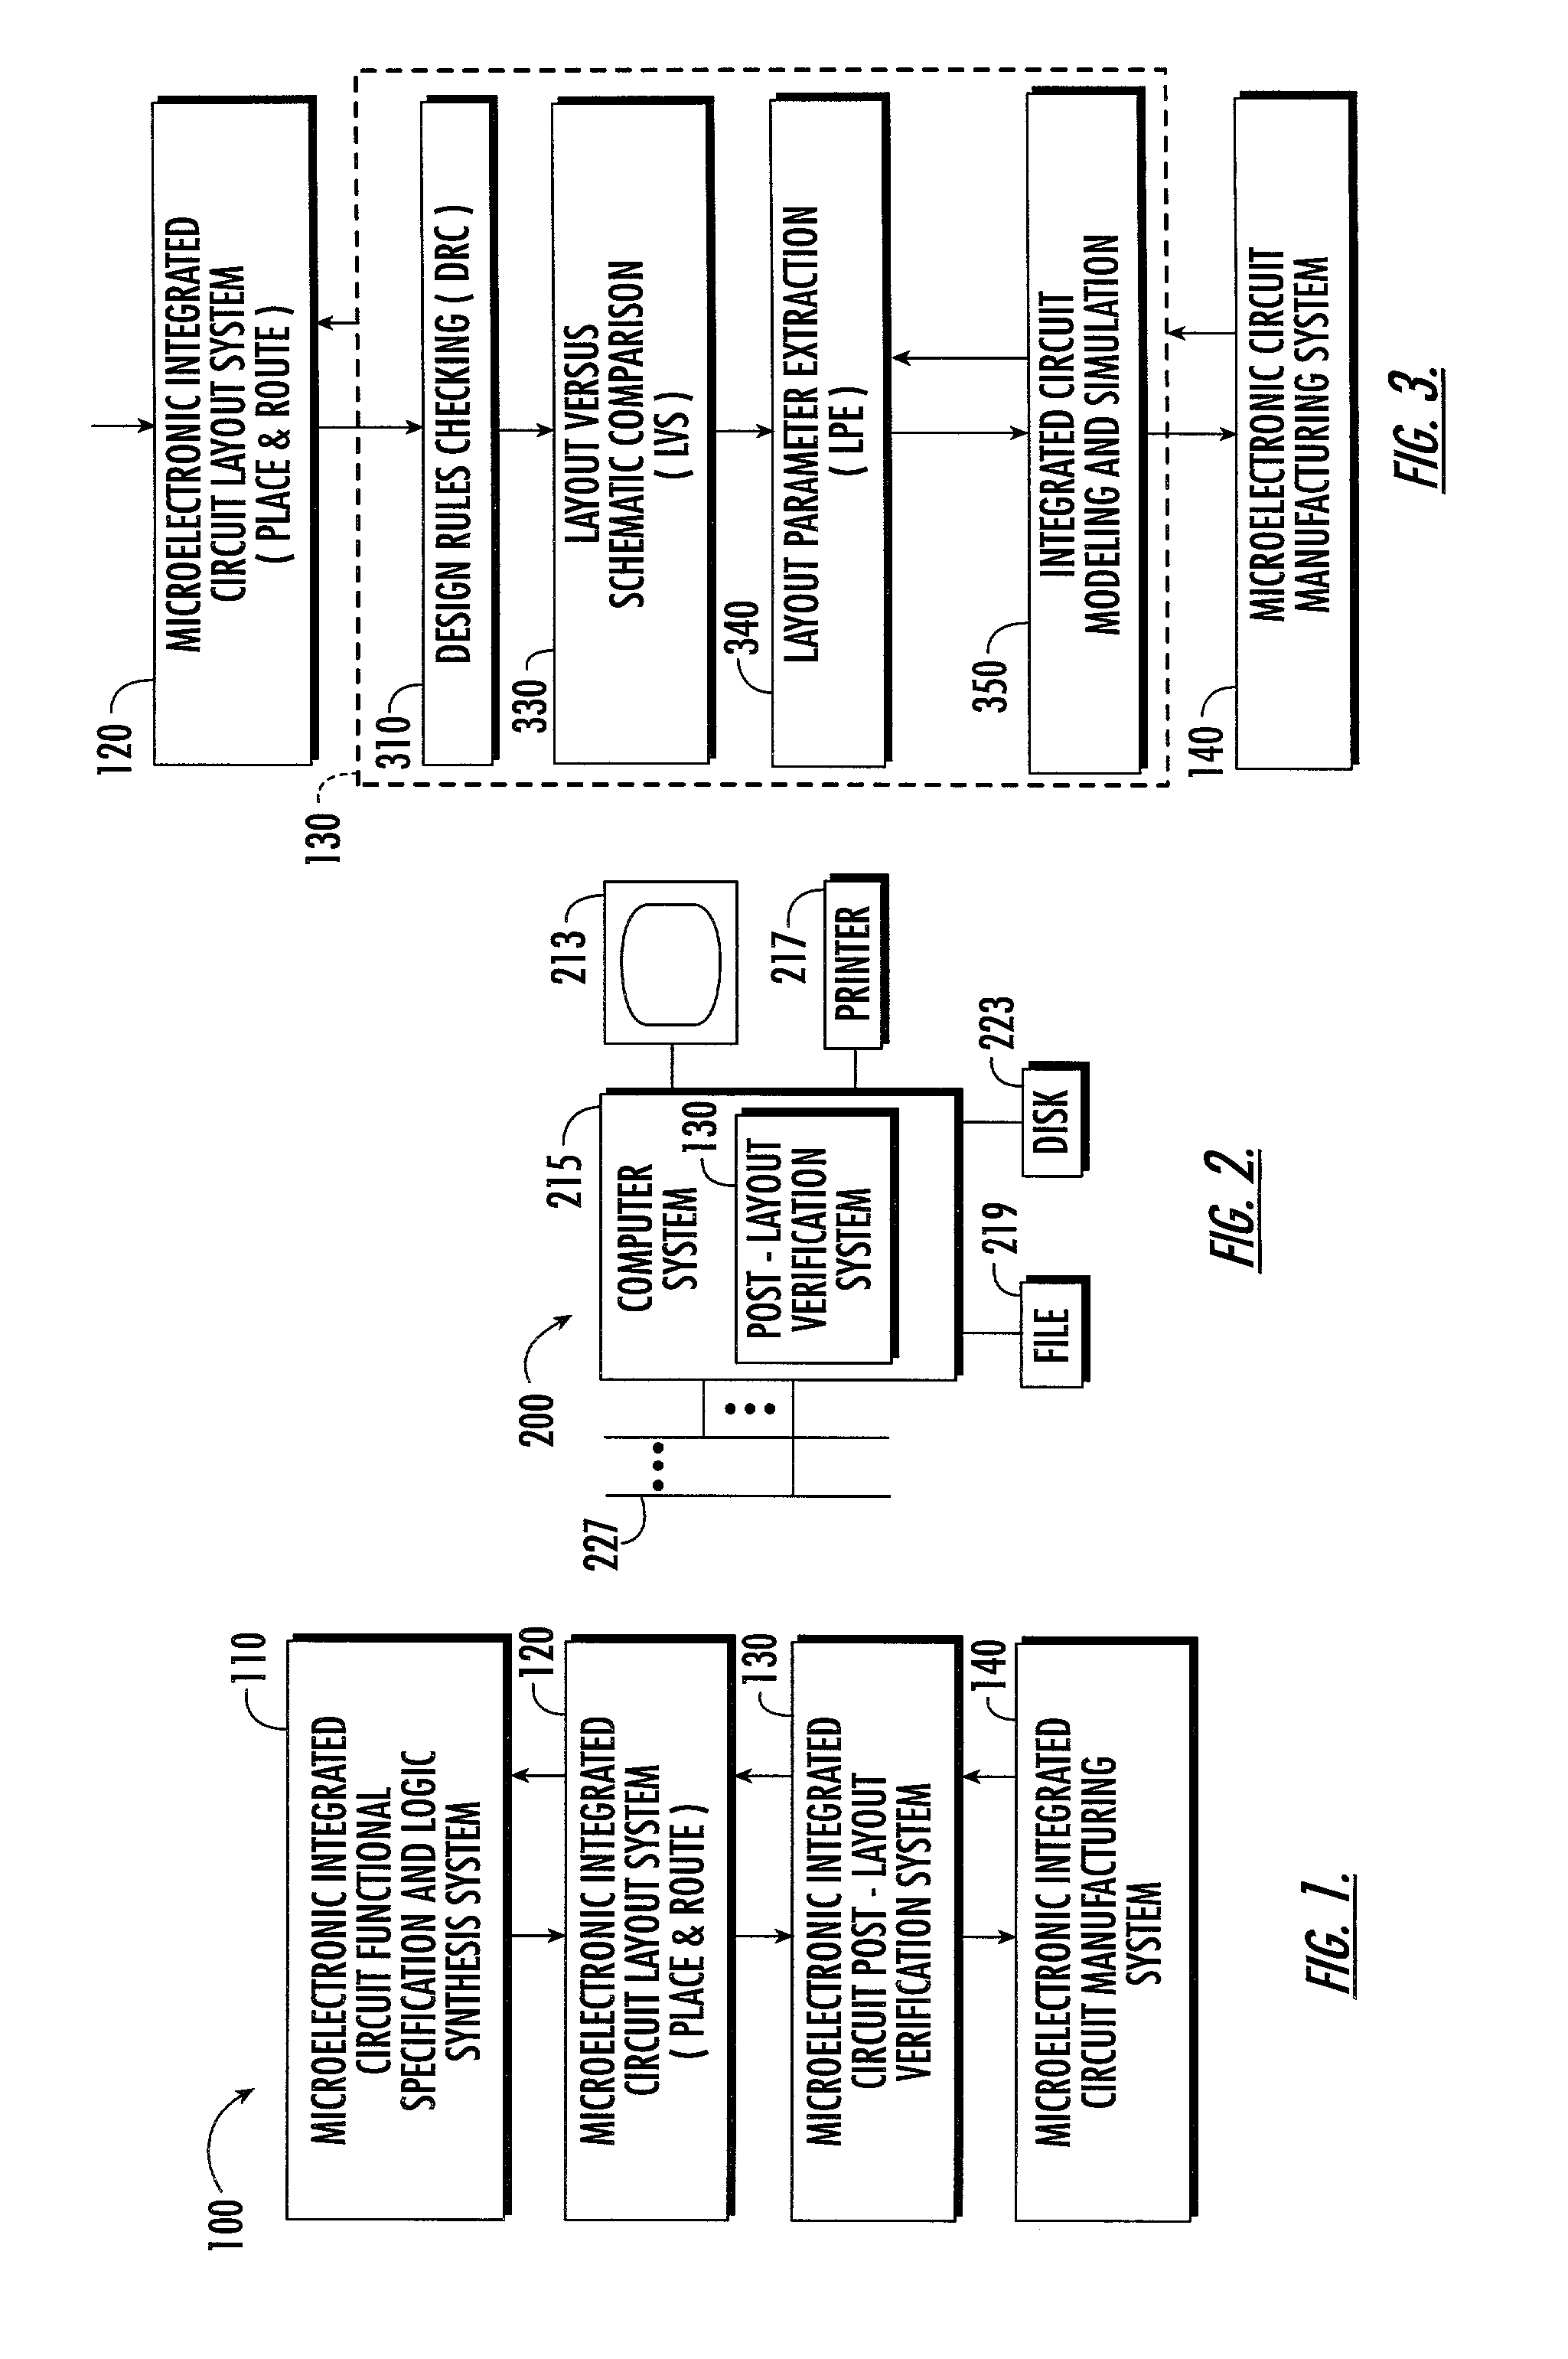 Systems, methods and computer program products for creating hierarchical equivalent circuit models